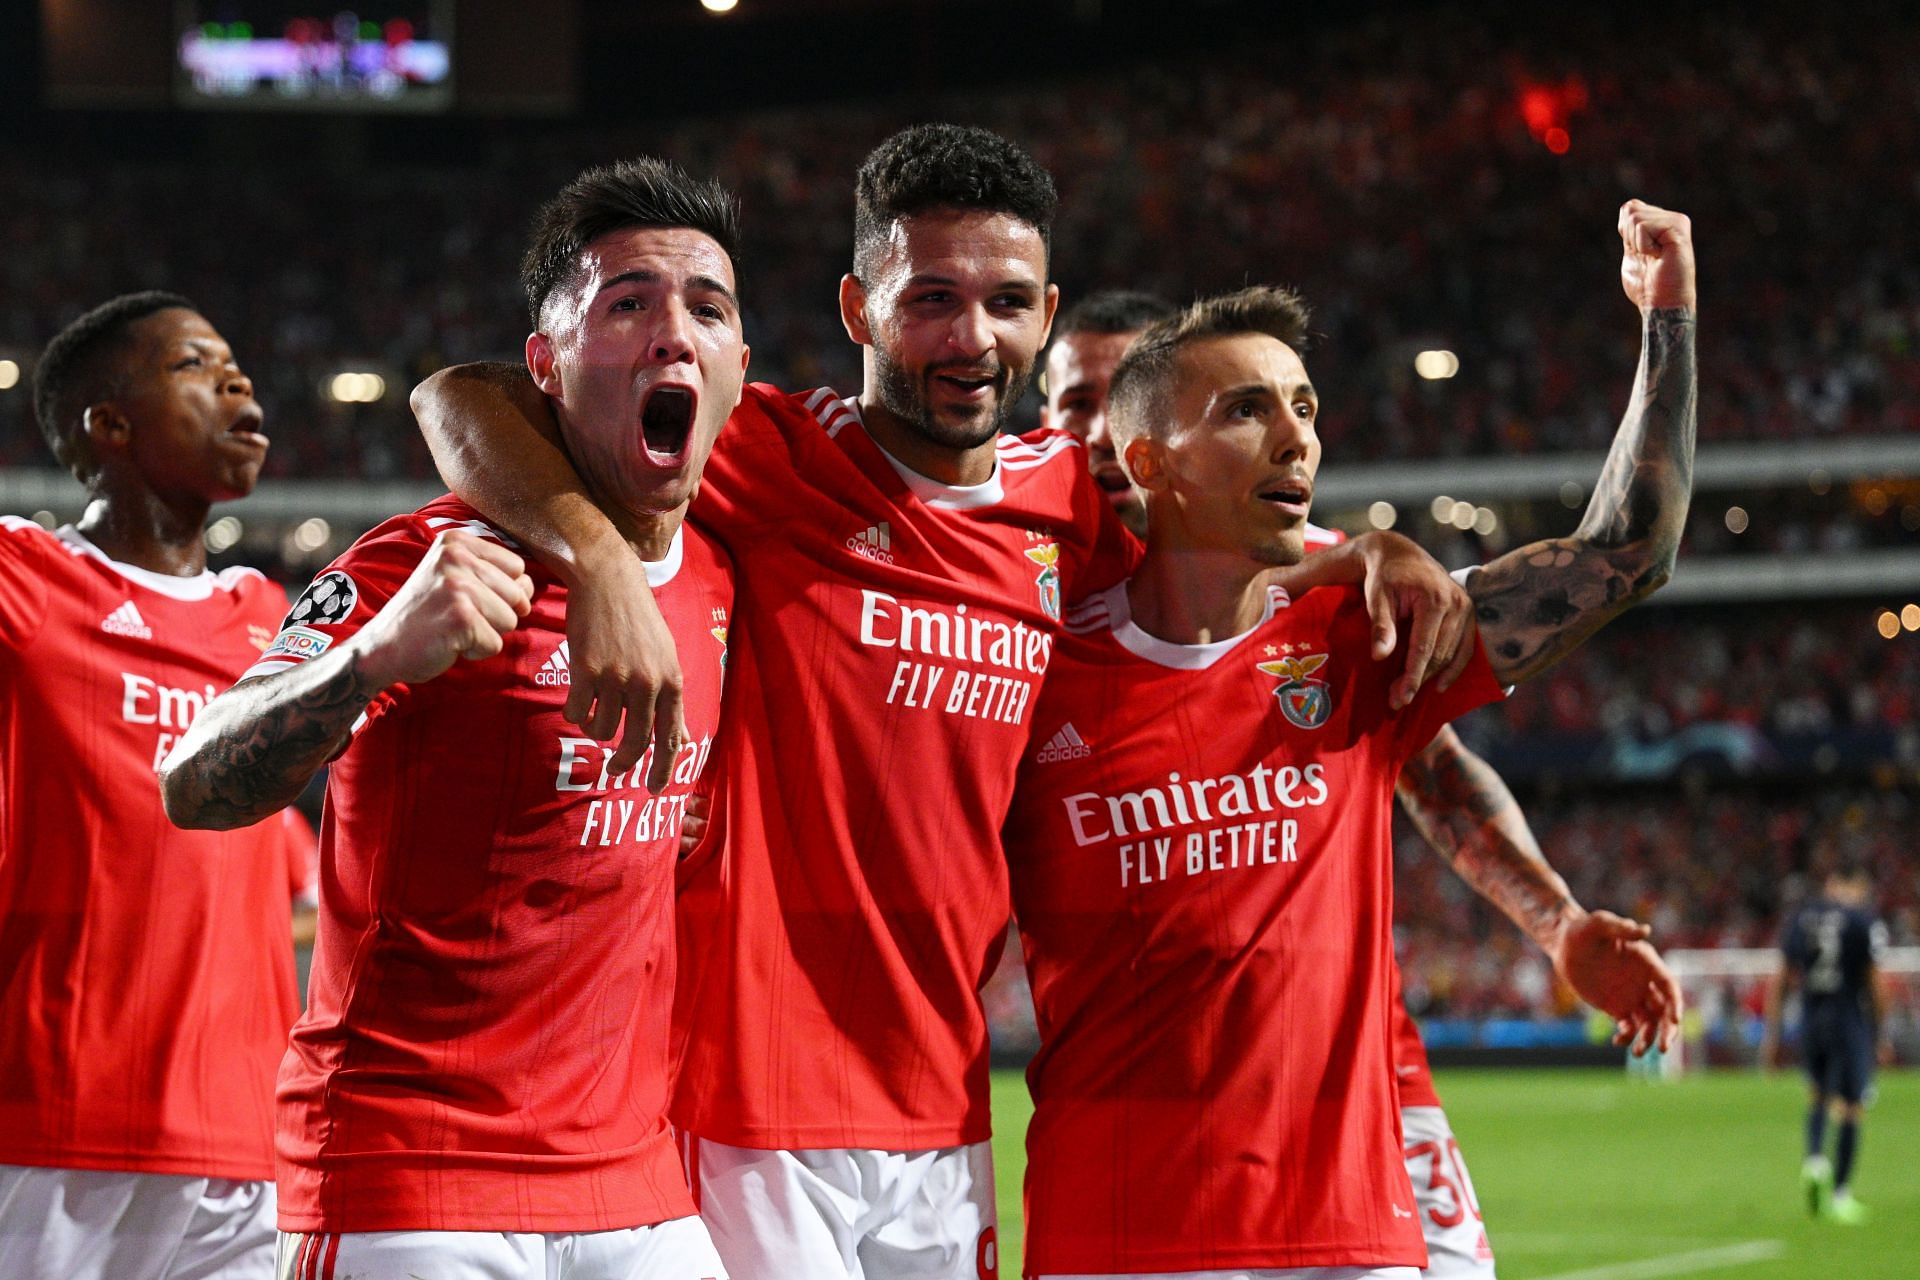 SL Benfica are one of the most in-form clubs in Europe this season